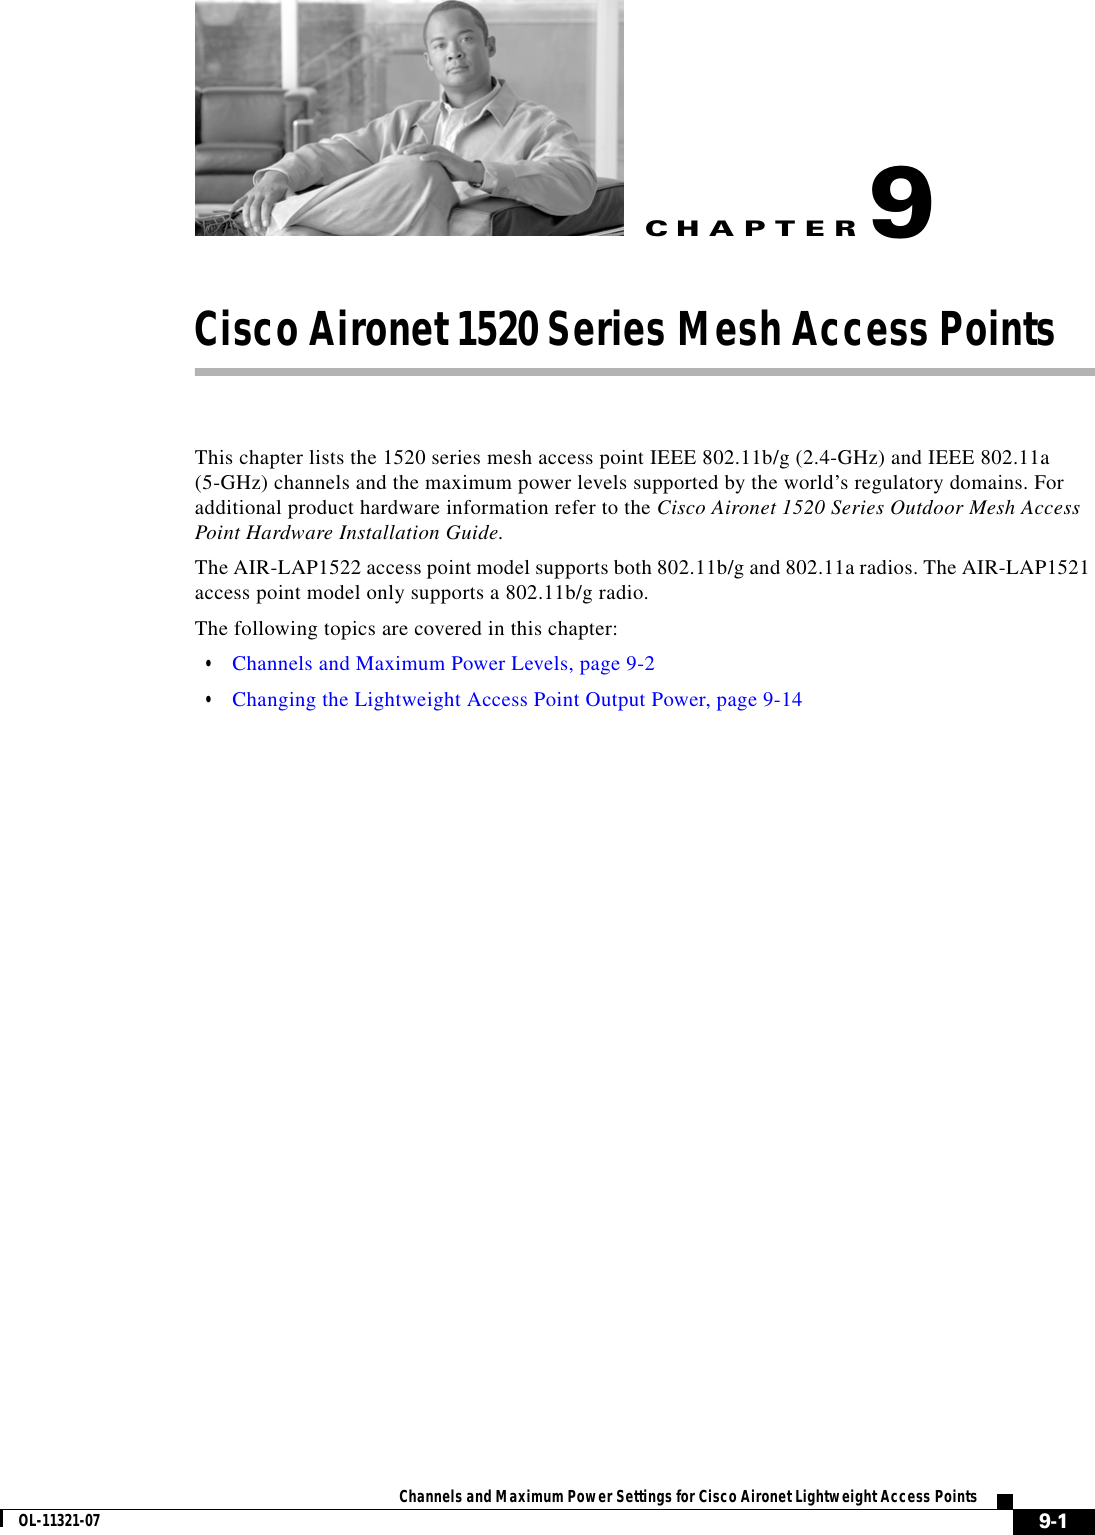 CHAPTER 9-1Channels and Maximum Power Settings for Cisco Aironet Lightweight Access PointsOL-11321-079Cisco Aironet 1520 Series Mesh Access Points This chapter lists the 1520 series mesh access point IEEE 802.11b/g (2.4-GHz) and IEEE 802.11a (5-GHz) channels and the maximum power levels supported by the world’s regulatory domains. For additional product hardware information refer to the Cisco Aironet 1520 Series Outdoor Mesh Access Point Hardware Installation Guide.The AIR-LAP1522 access point model supports both 802.11b/g and 802.11a radios. The AIR-LAP1521 access point model only supports a 802.11b/g radio.The following topics are covered in this chapter:  • Channels and Maximum Power Levels, page 9-2  • Changing the Lightweight Access Point Output Power, page 9-14